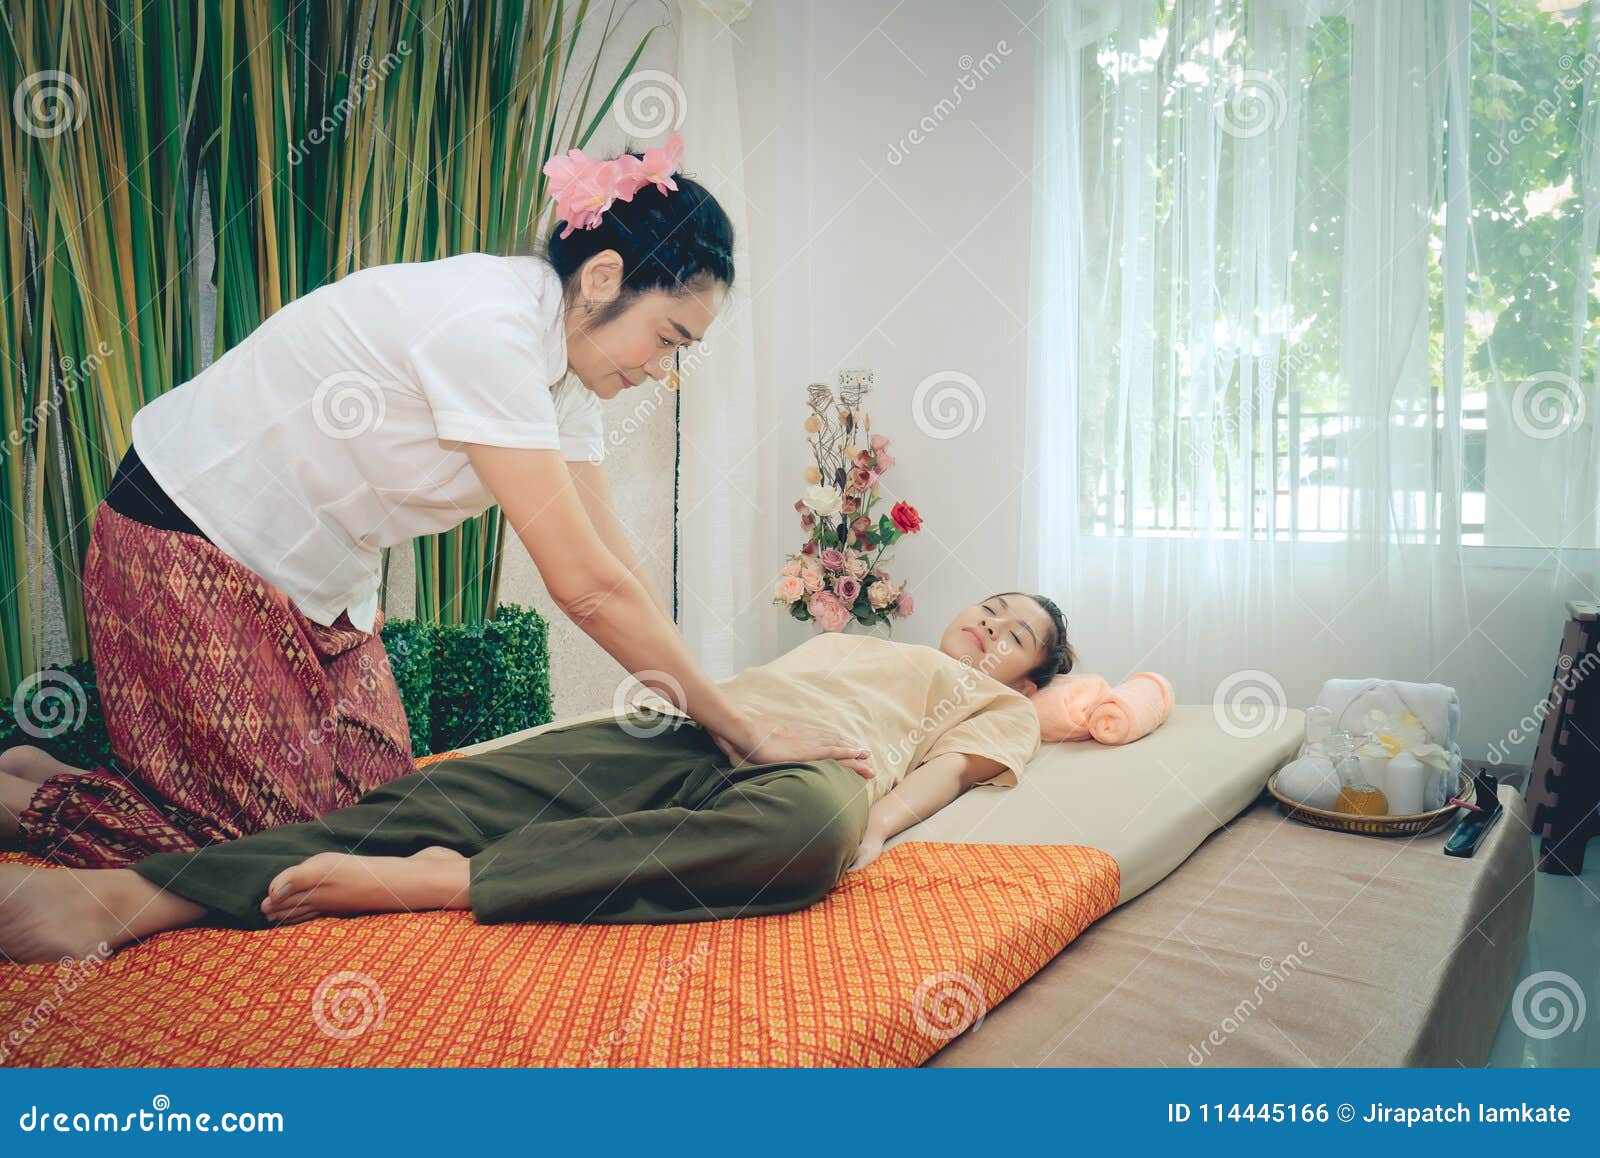 Professional Therapist Giving Traditional Thai Massage To A Woman In